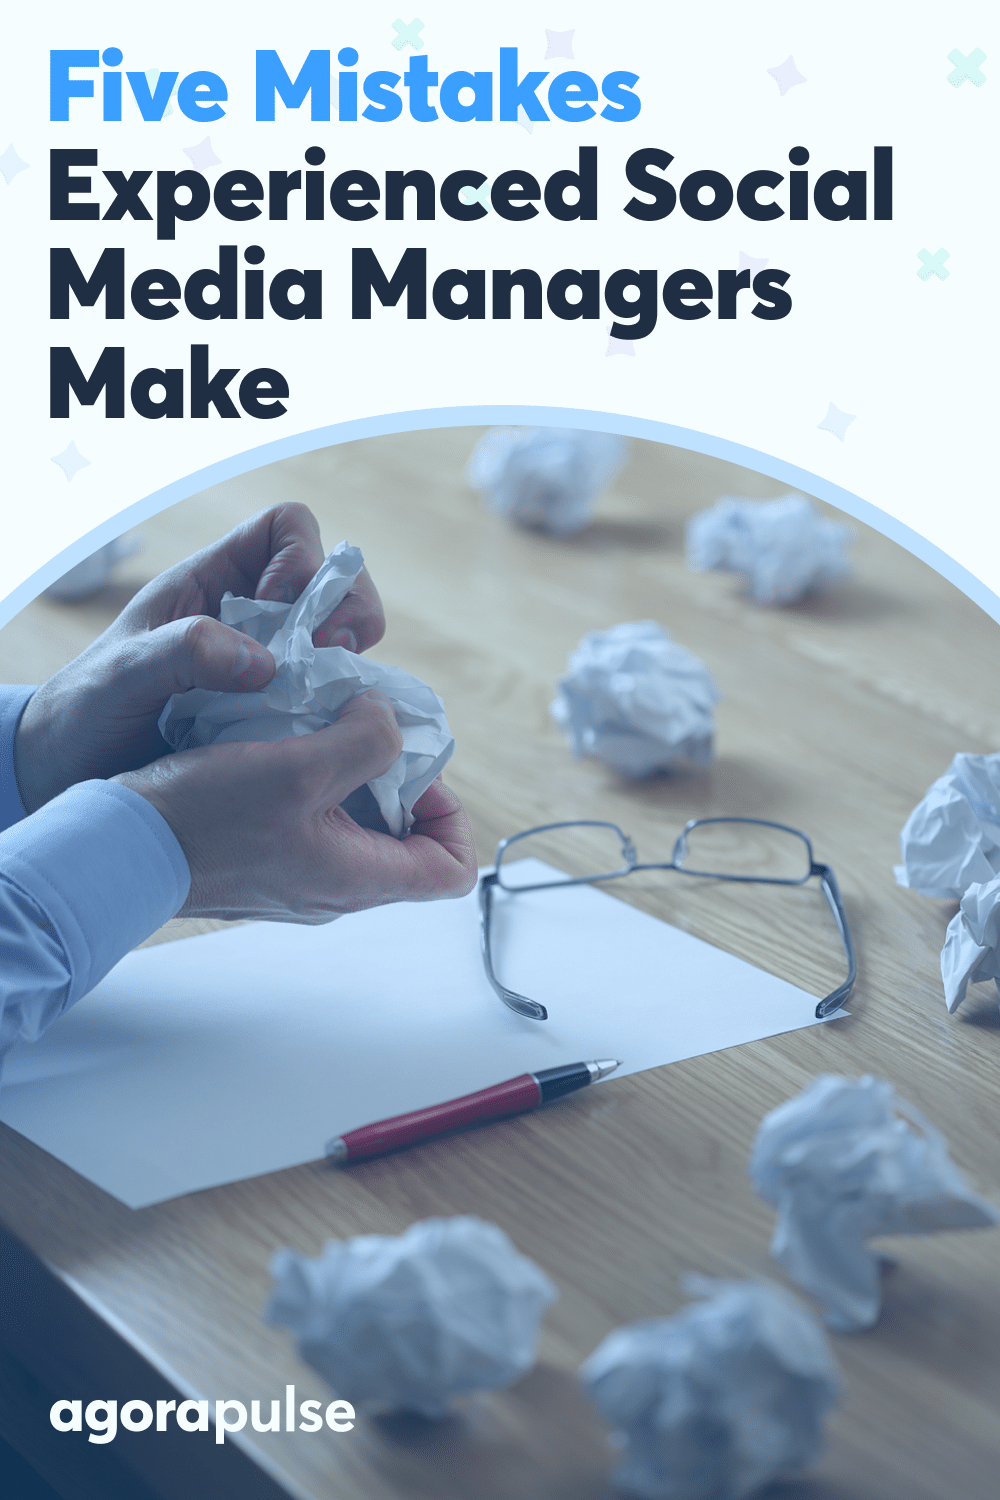 Five Mistakes That Even Experienced Social Media Managers Make